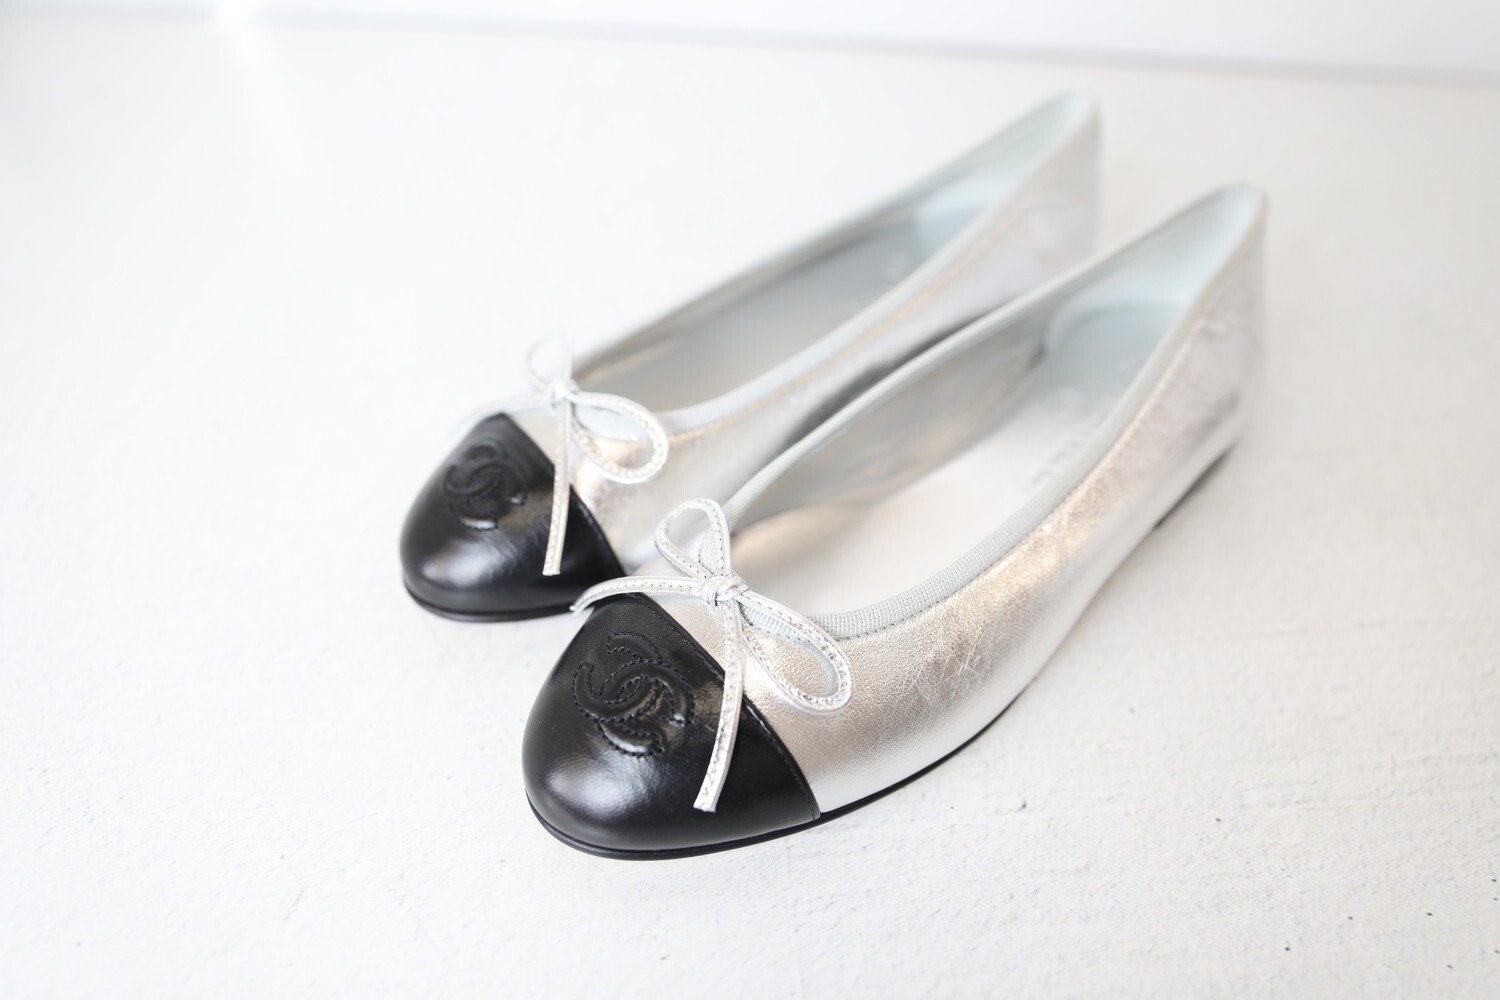 Chanel Ballet Flats, Silver and Black, Size 37, New in Box WA001